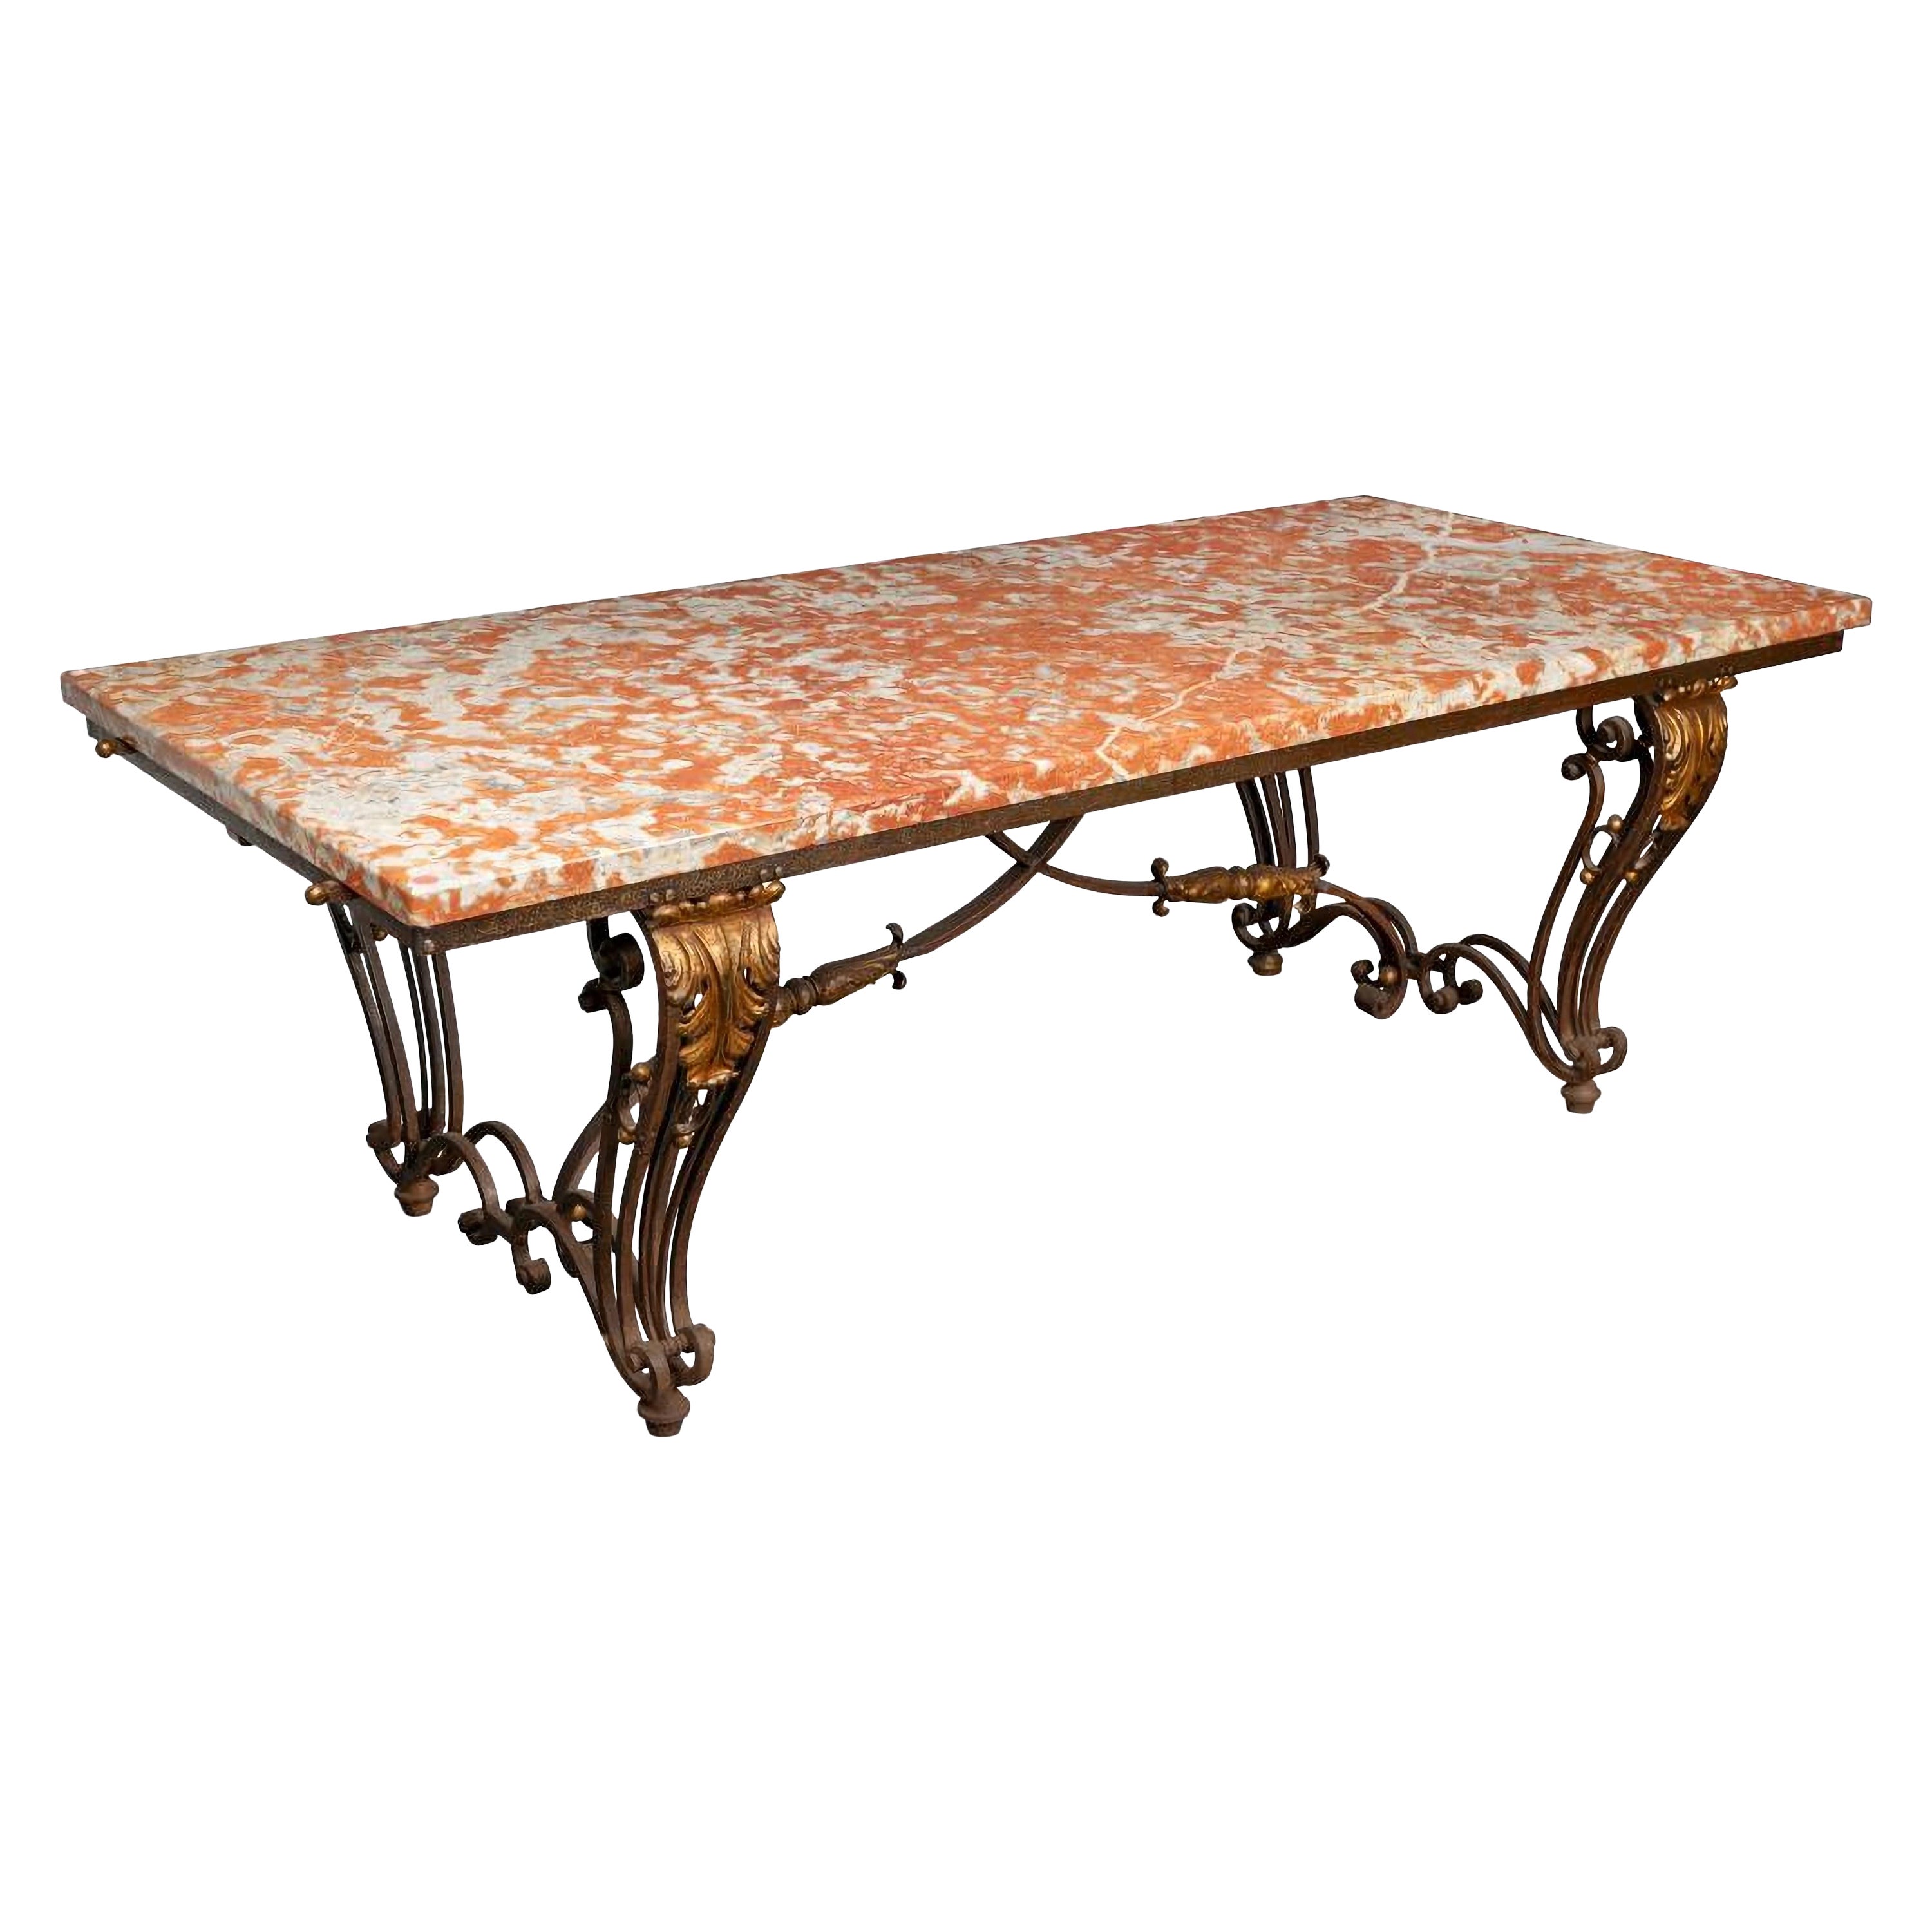 An Early 20th Century French Orange Marble-Top Table On Wrought Iron Base